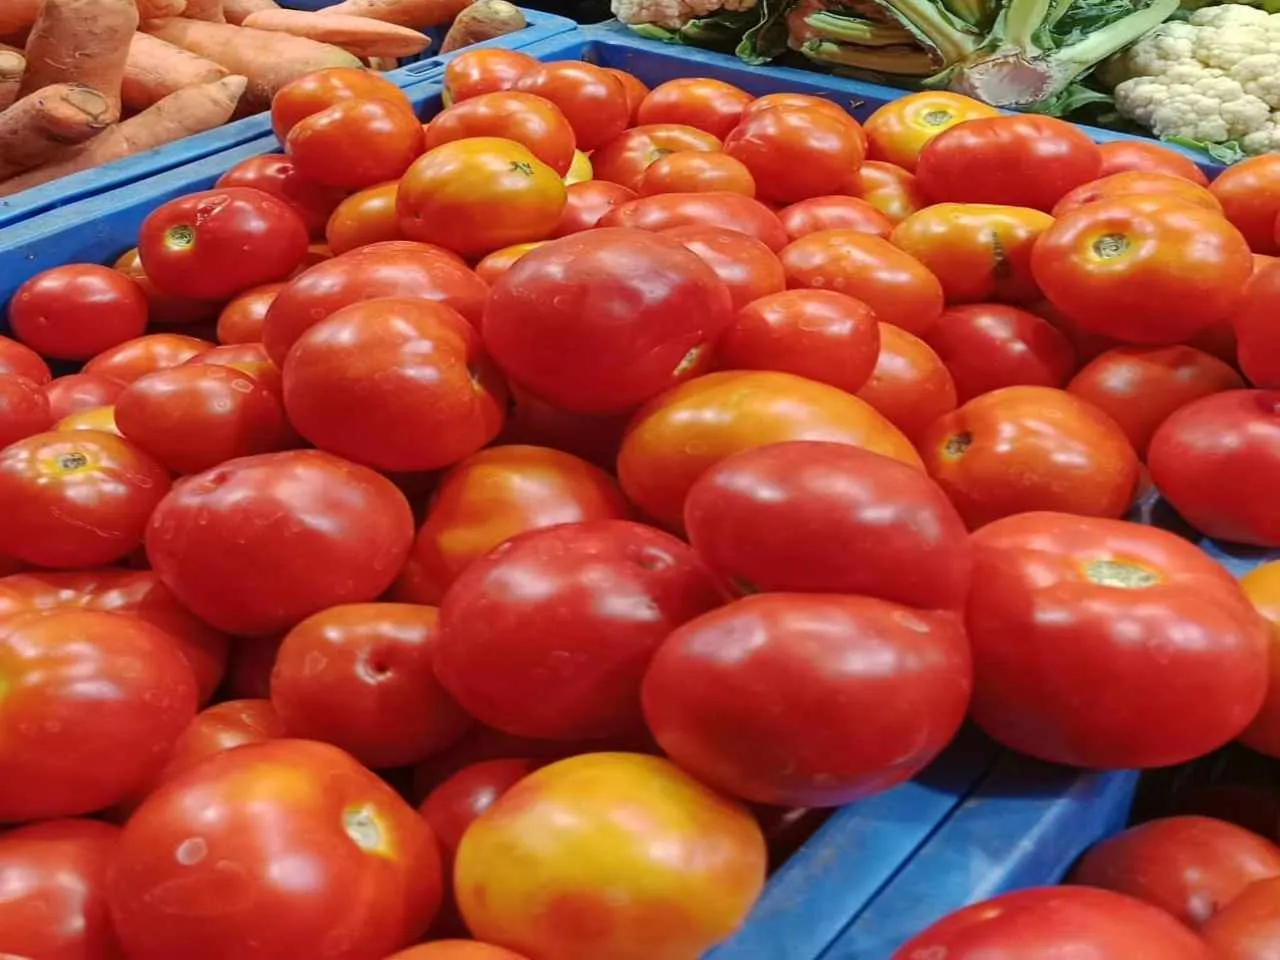 MP Man Uses 2 Tomatoes To Cook Meal, Furious Wife Leaves Home